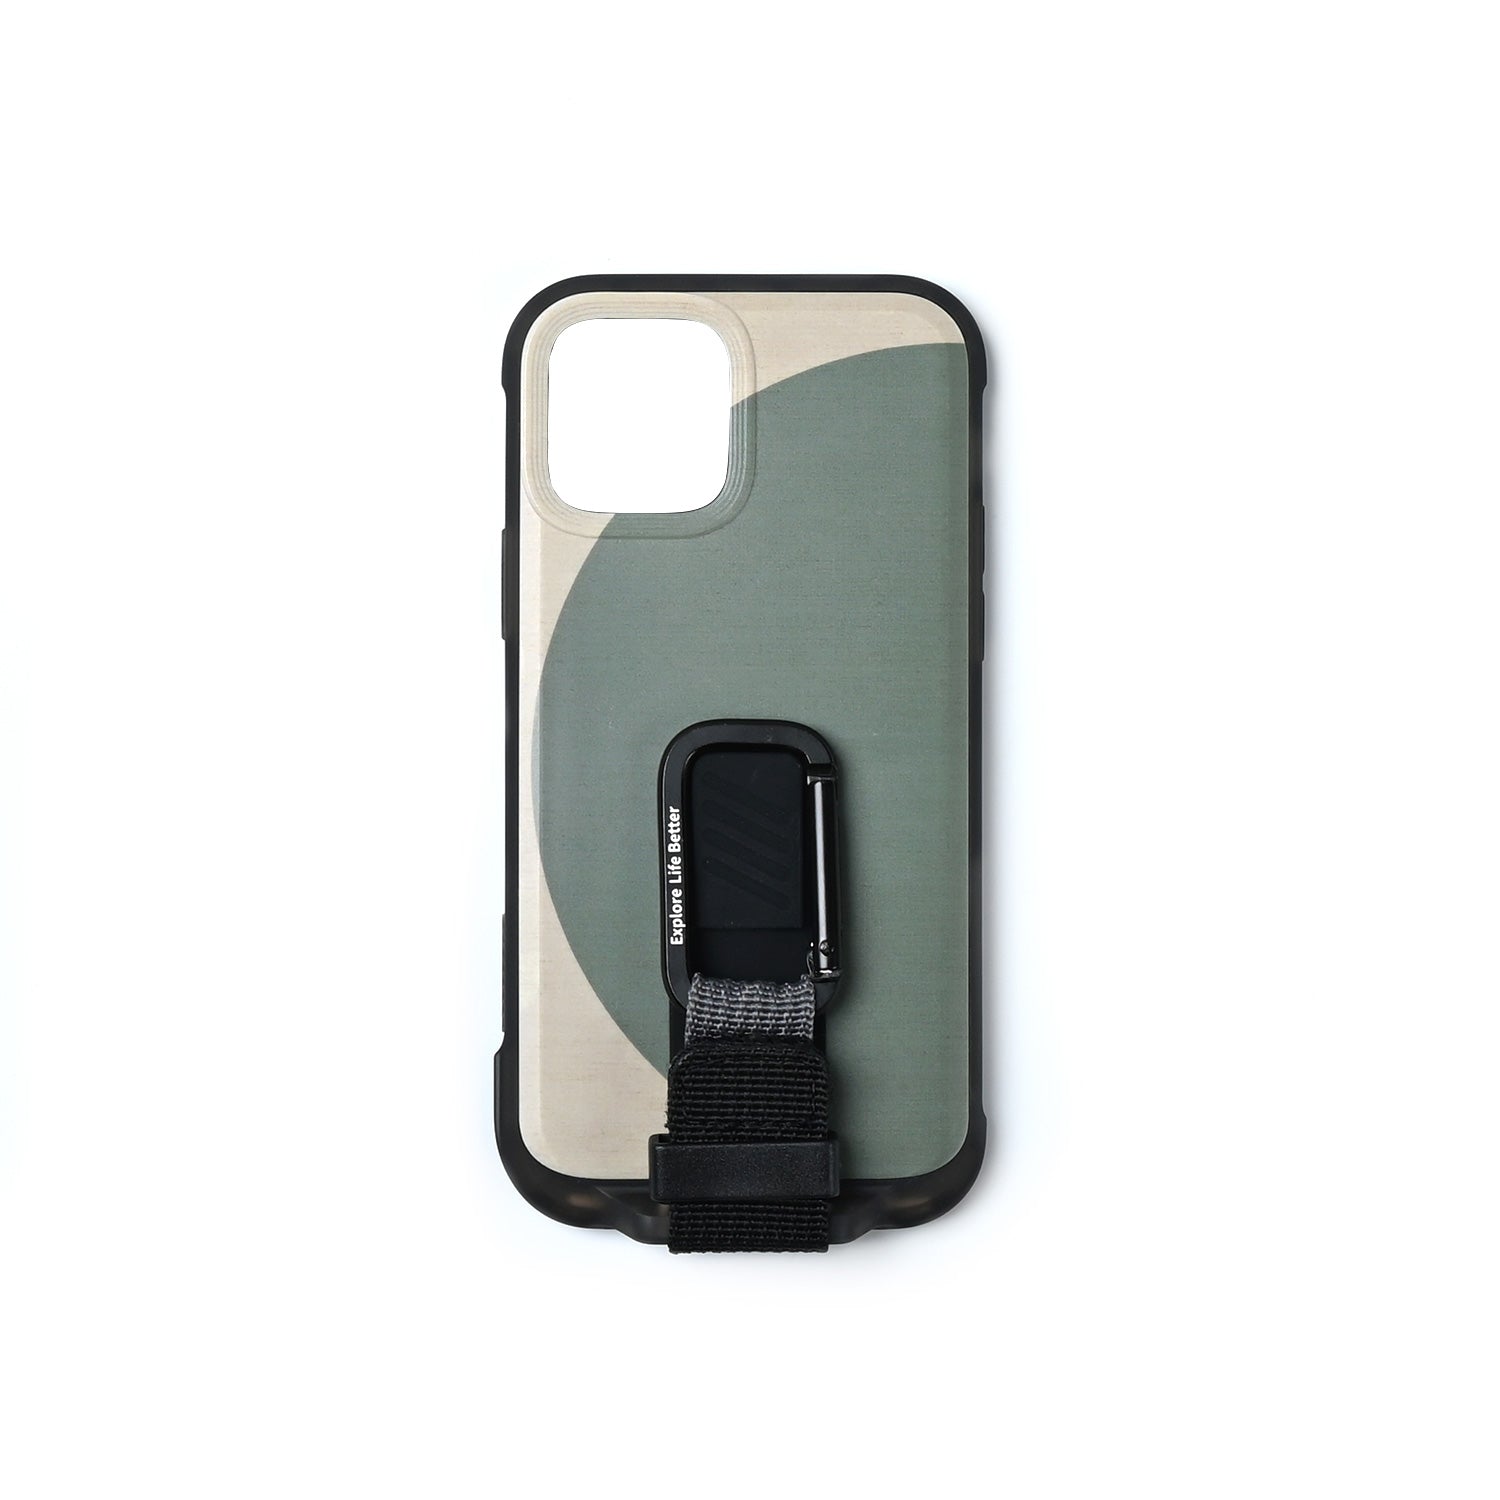 Wander Case for iPhone 12 Series - Light Blue